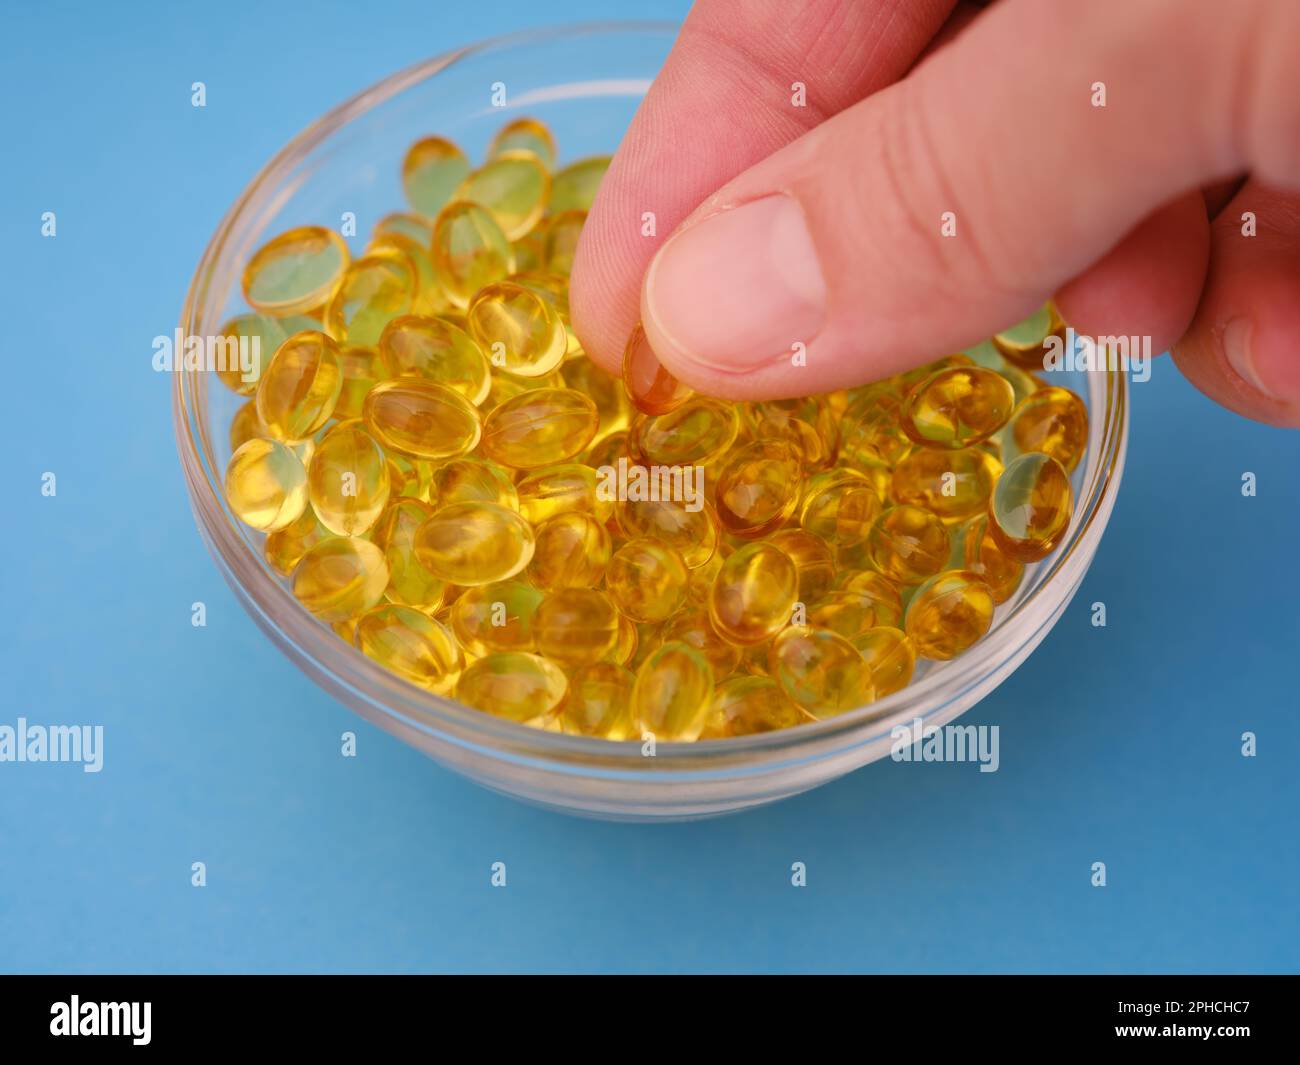 A woman taking a vitamin D3 softgel from a glass bowl of other softgels. Close up. Stock Photo